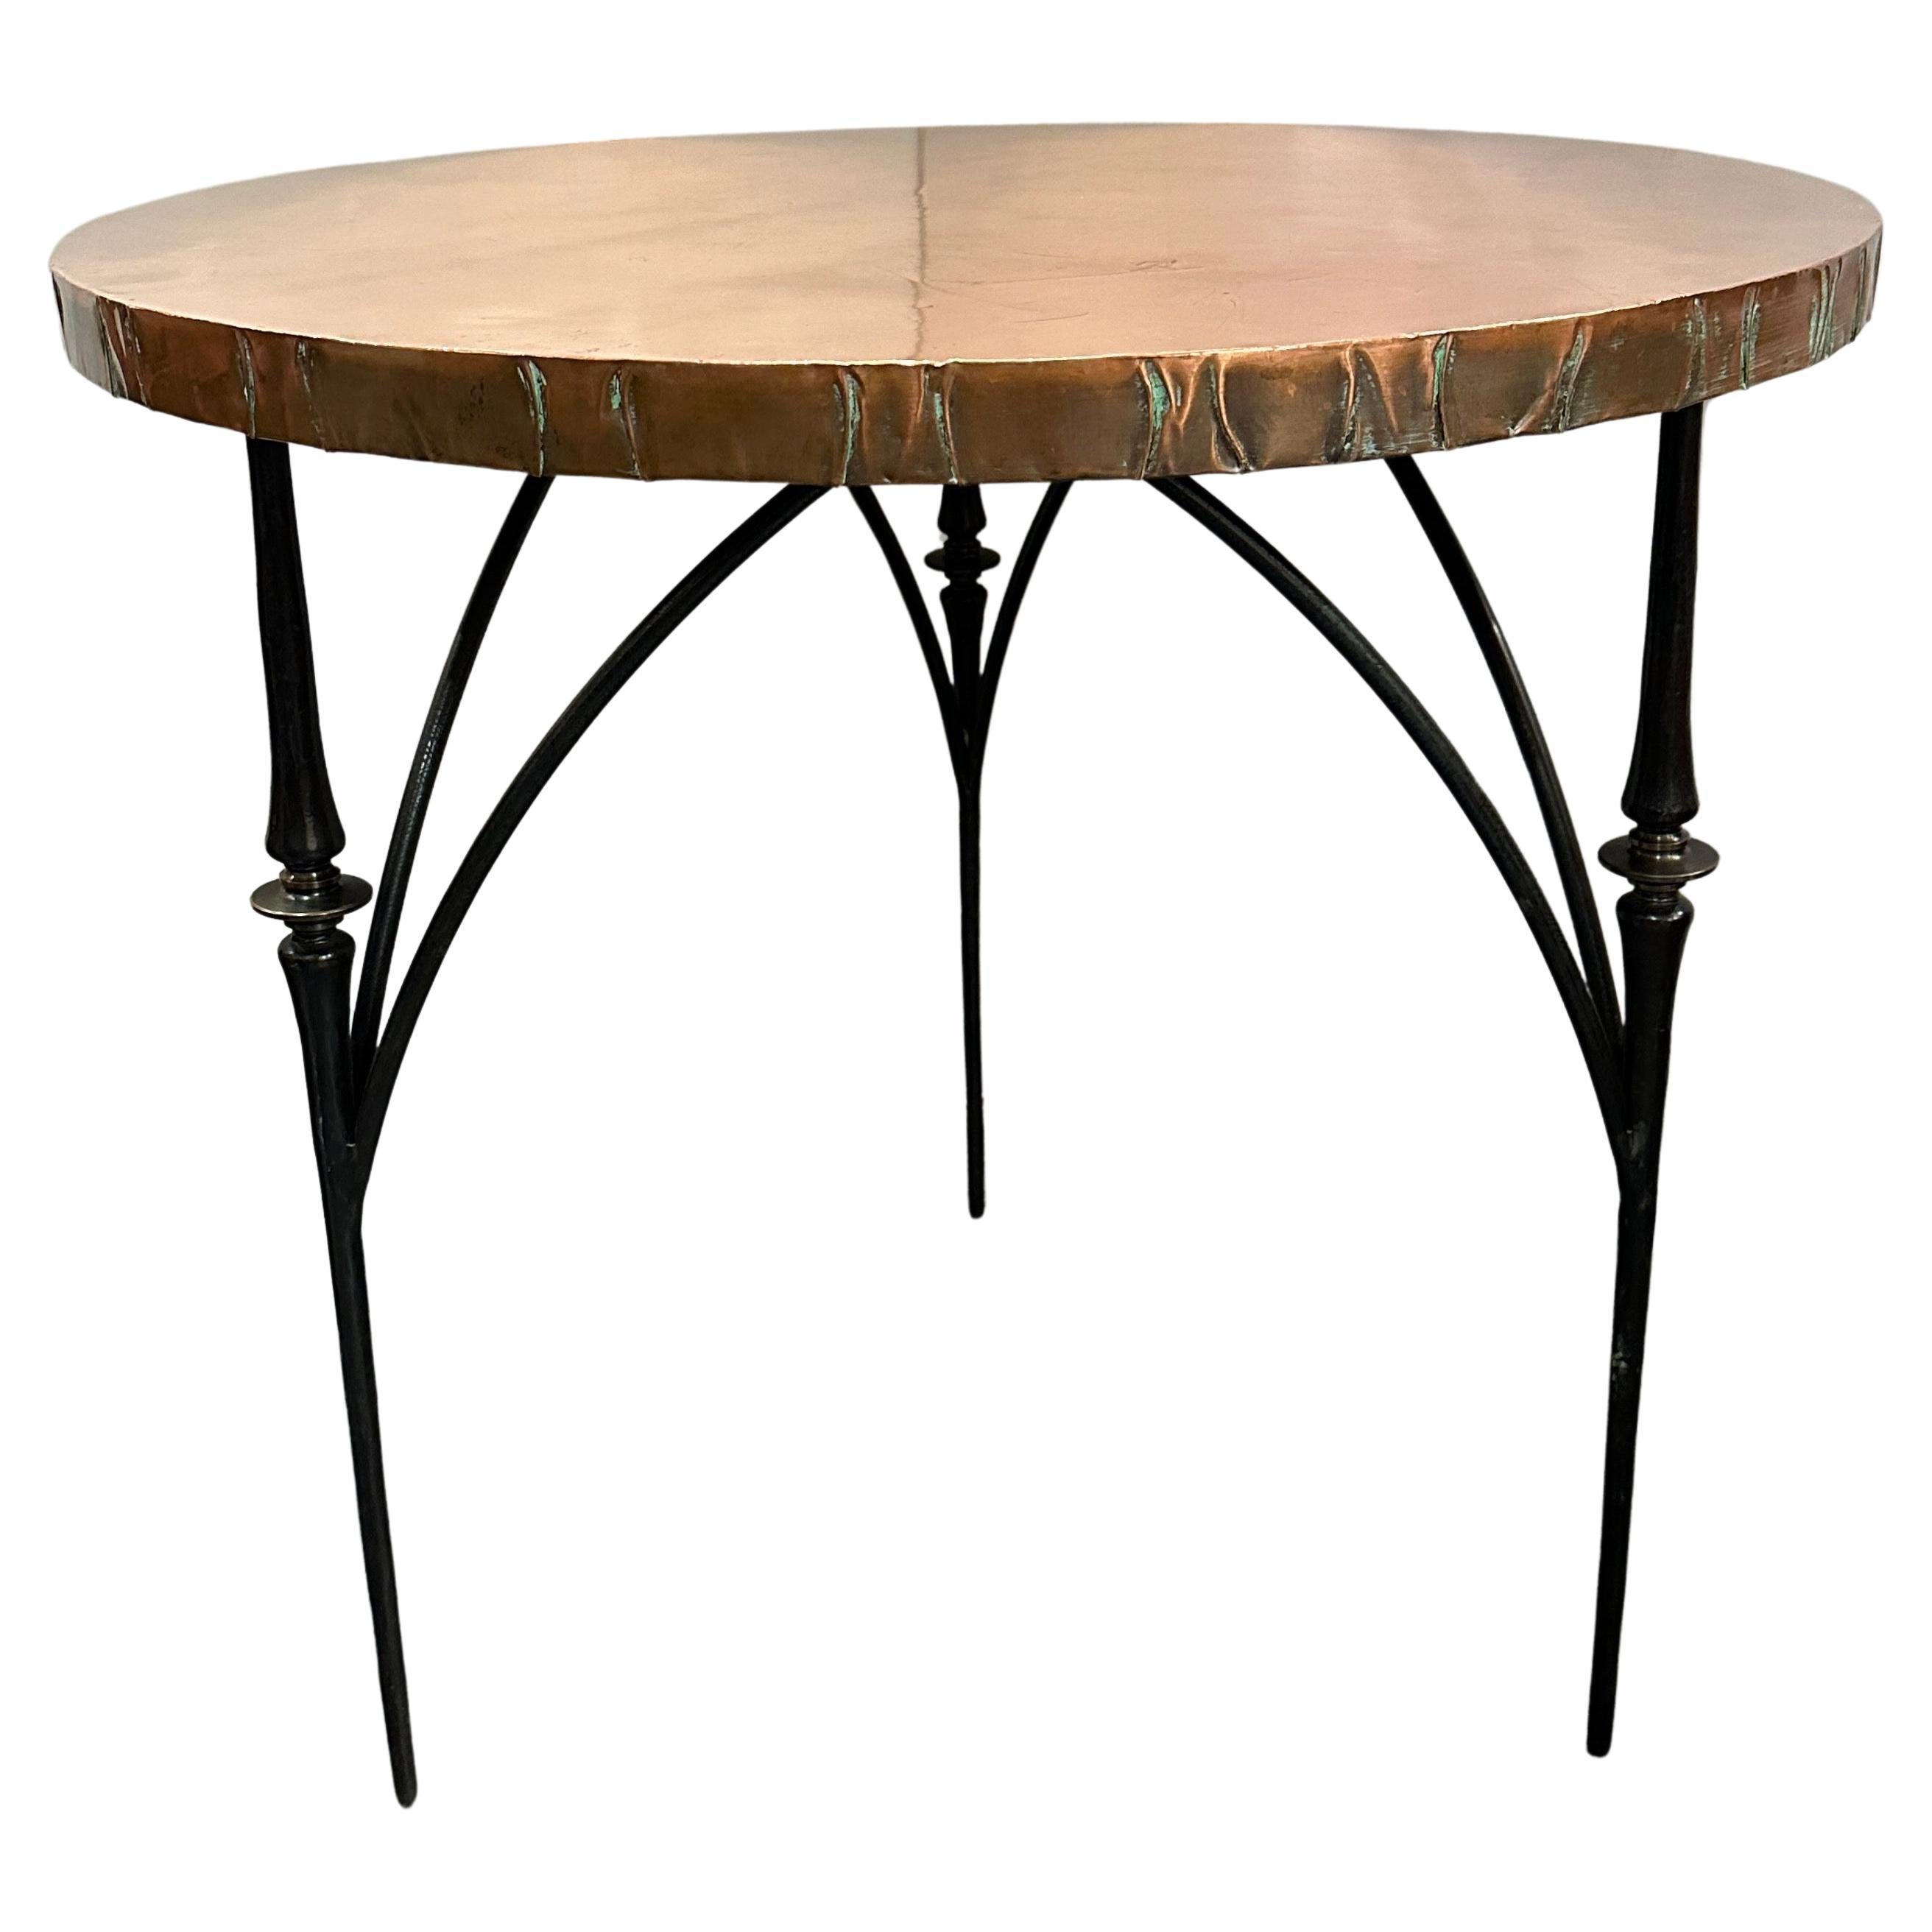 Pair of Continental, copper topped tables with patinated bronze legs and polished bronze detail.  Folded edges of copper create great interest and add depth to the apron.  Sold separately.